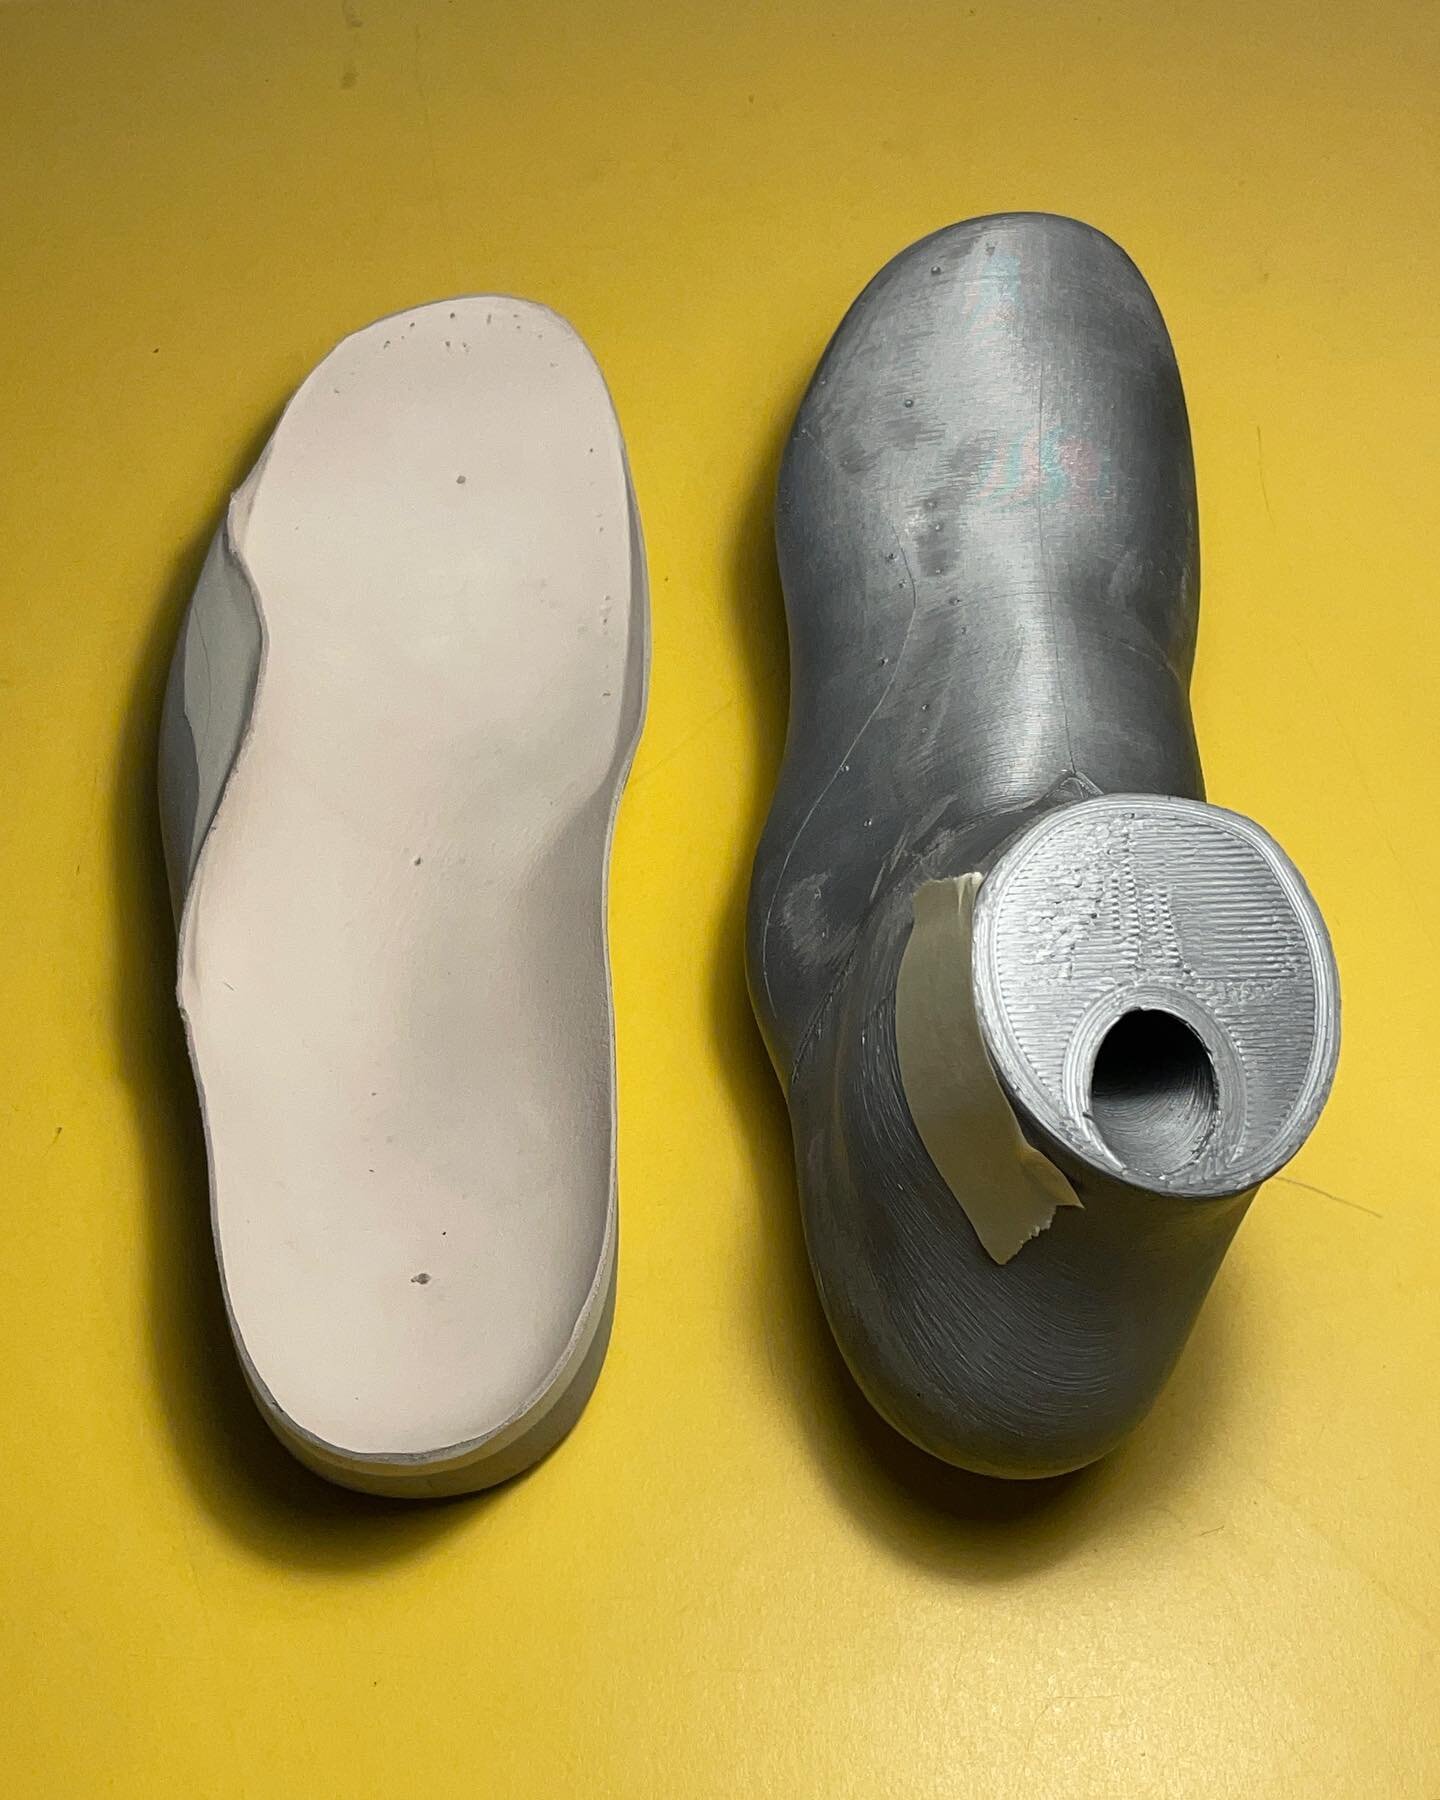 A rocker-bottom foot is managed well with custom footwear that accommodates and guides the unique shape to distribute pressure. Fillers are added to the insole to increase lateral support and coincidentally make for a normal looking boot.